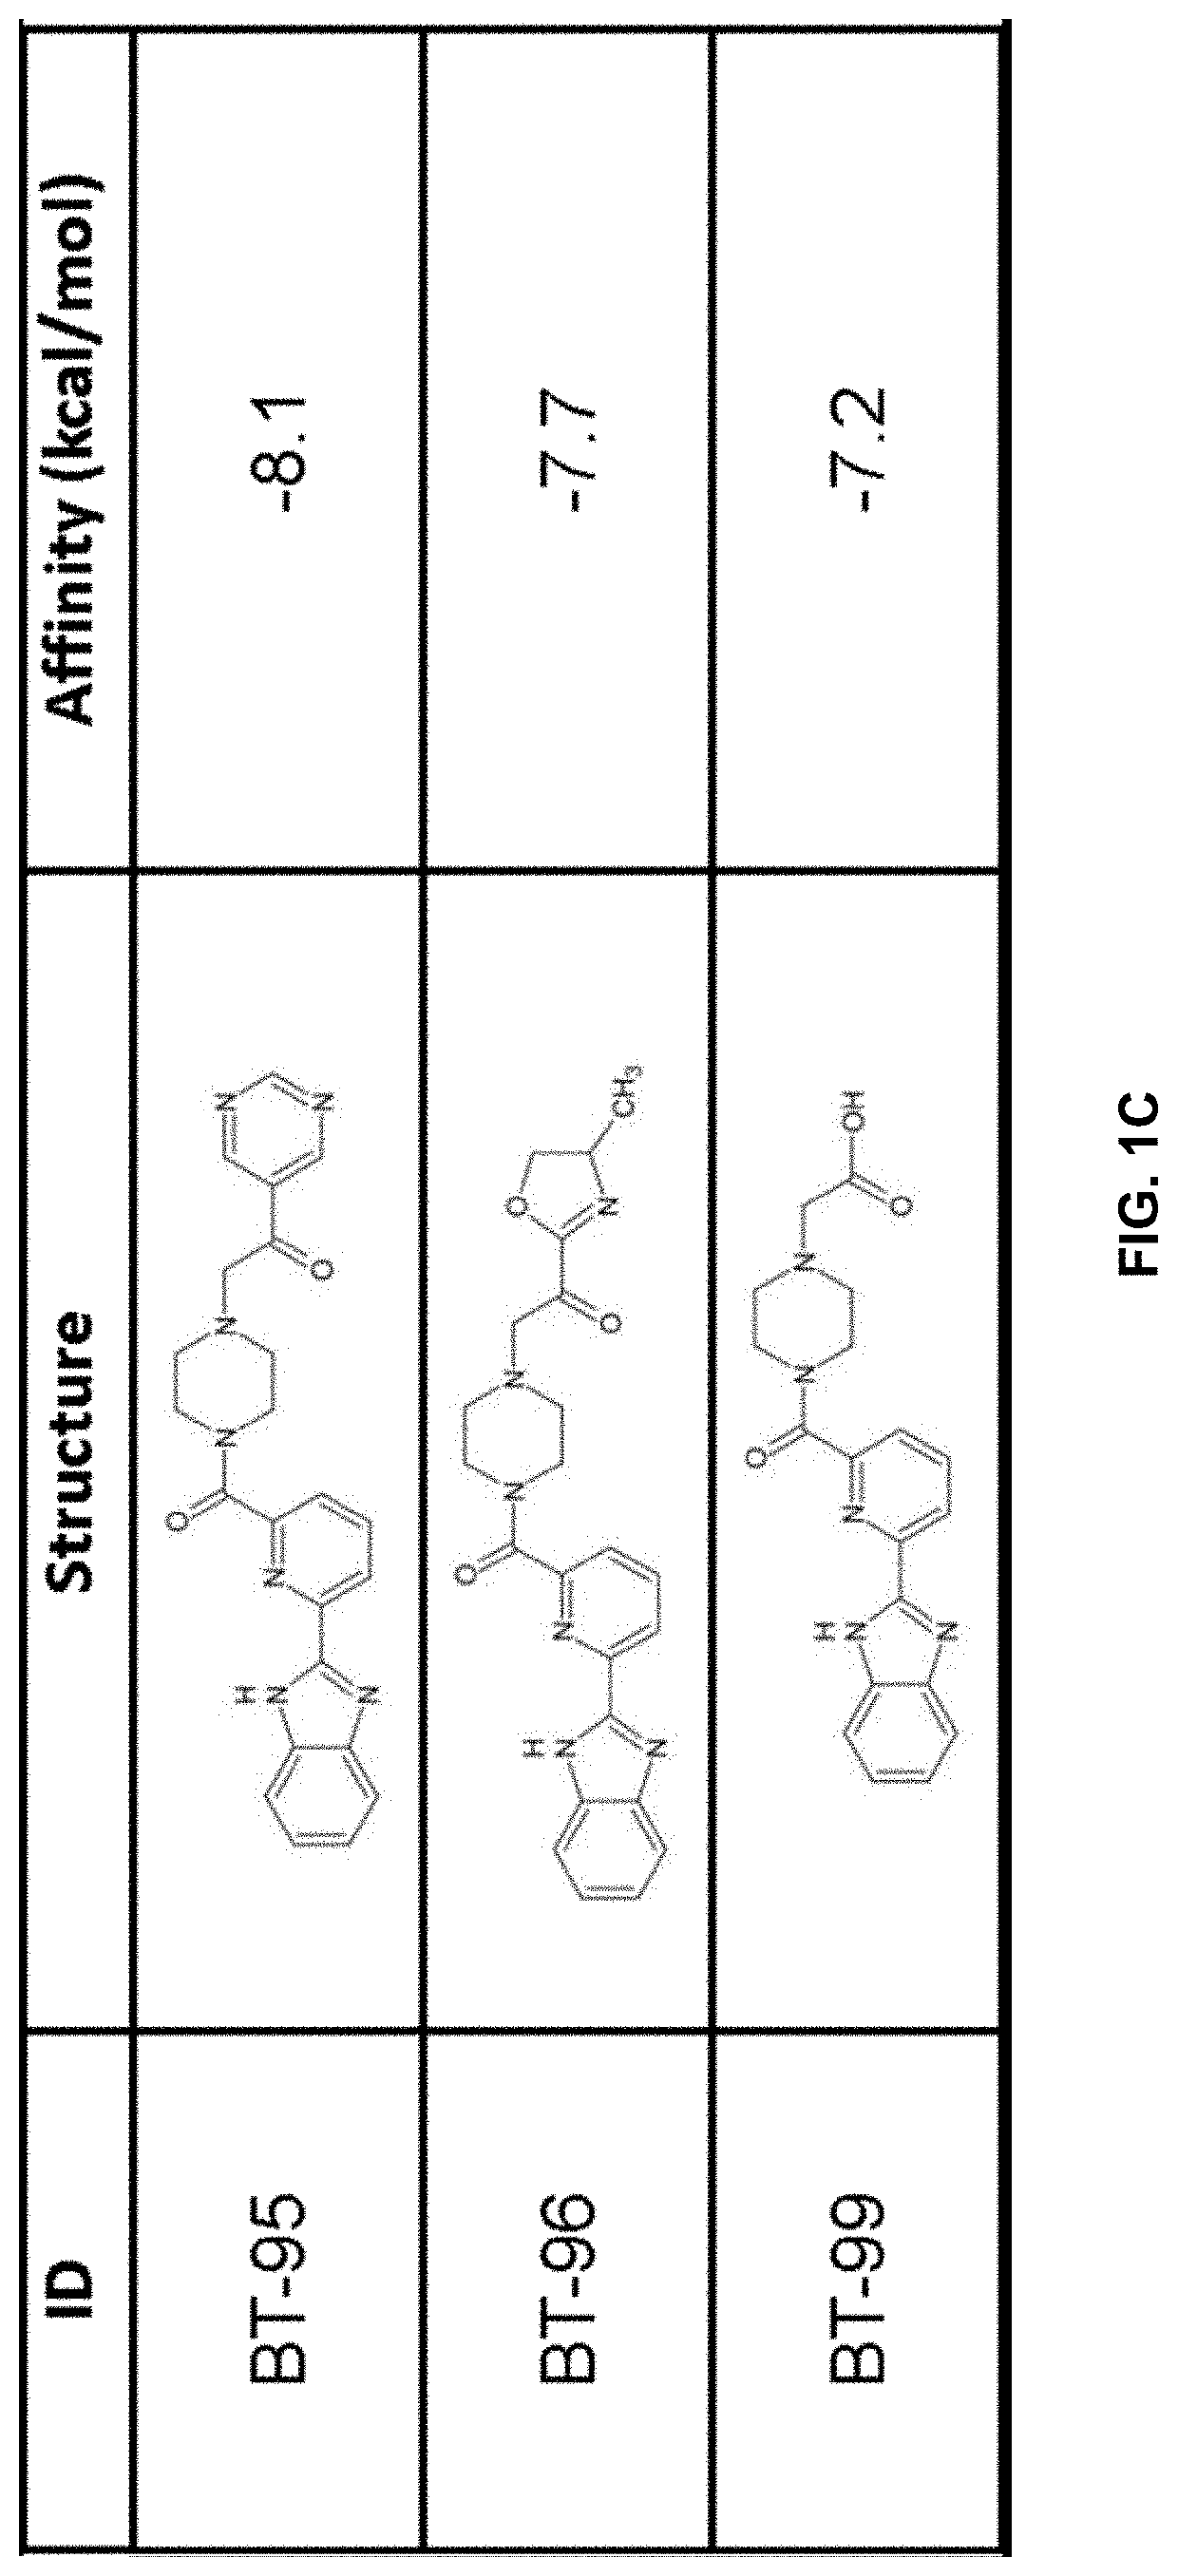 Lanthionine c-like protein 2 ligands, cells prepared therewith, and therapies using same